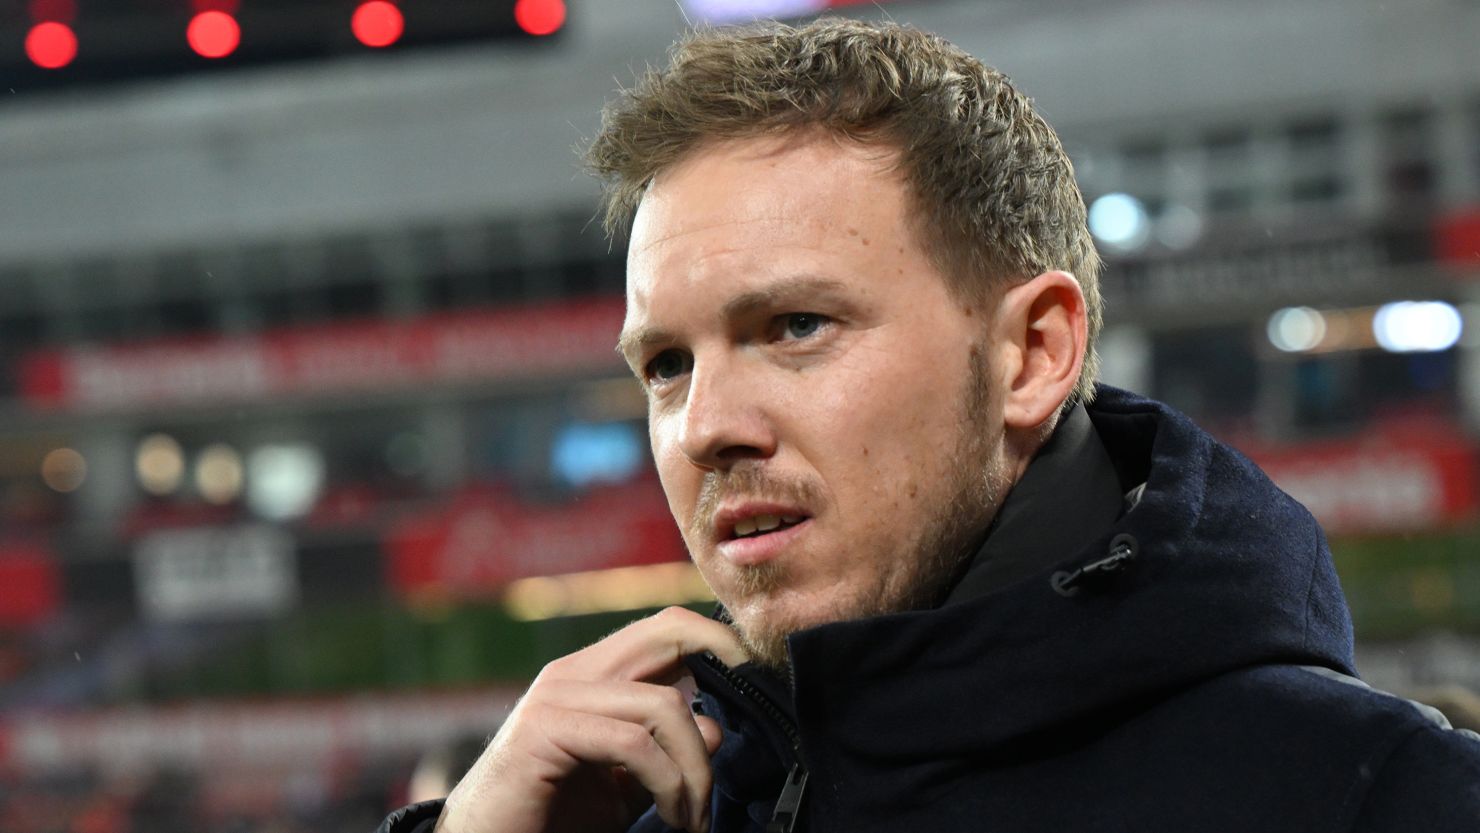 Julian Nagelsmann was appointed manager of Germany's national soccer team in September.